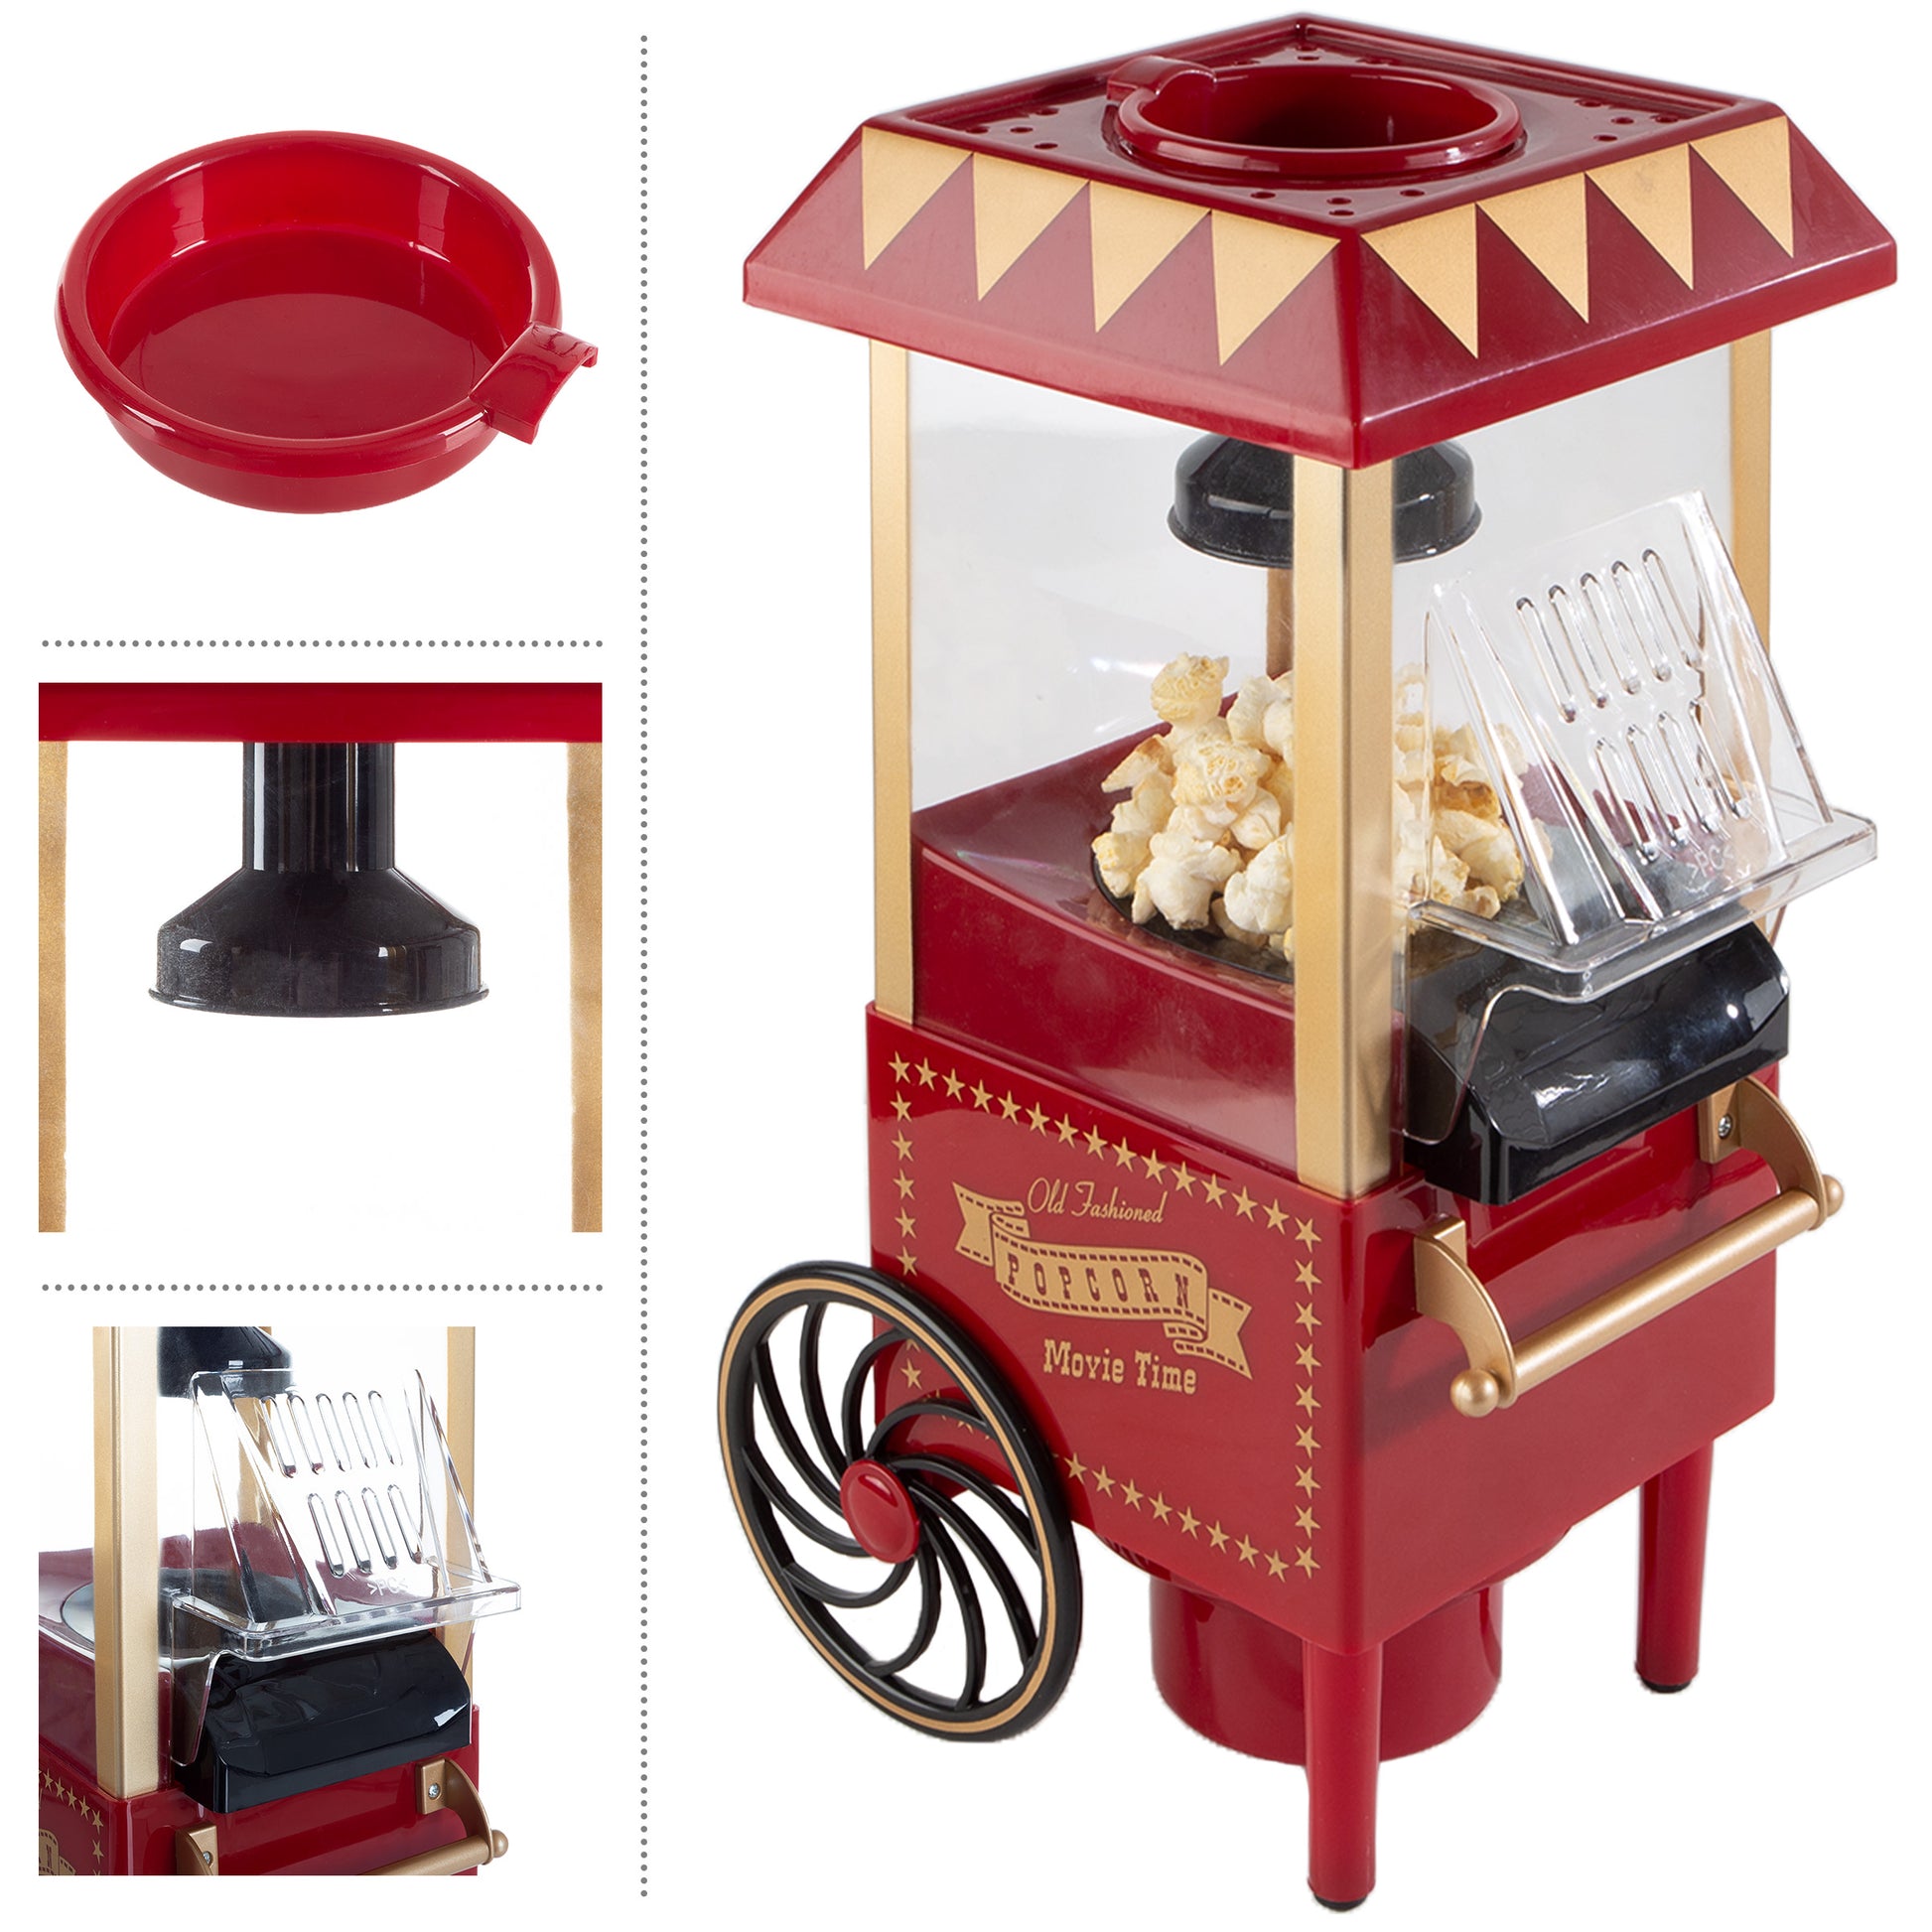 Great Northern Popcorn 6-Cup Capacity Vintage-Style Air Popper Countertop Popcorn Machine - Red